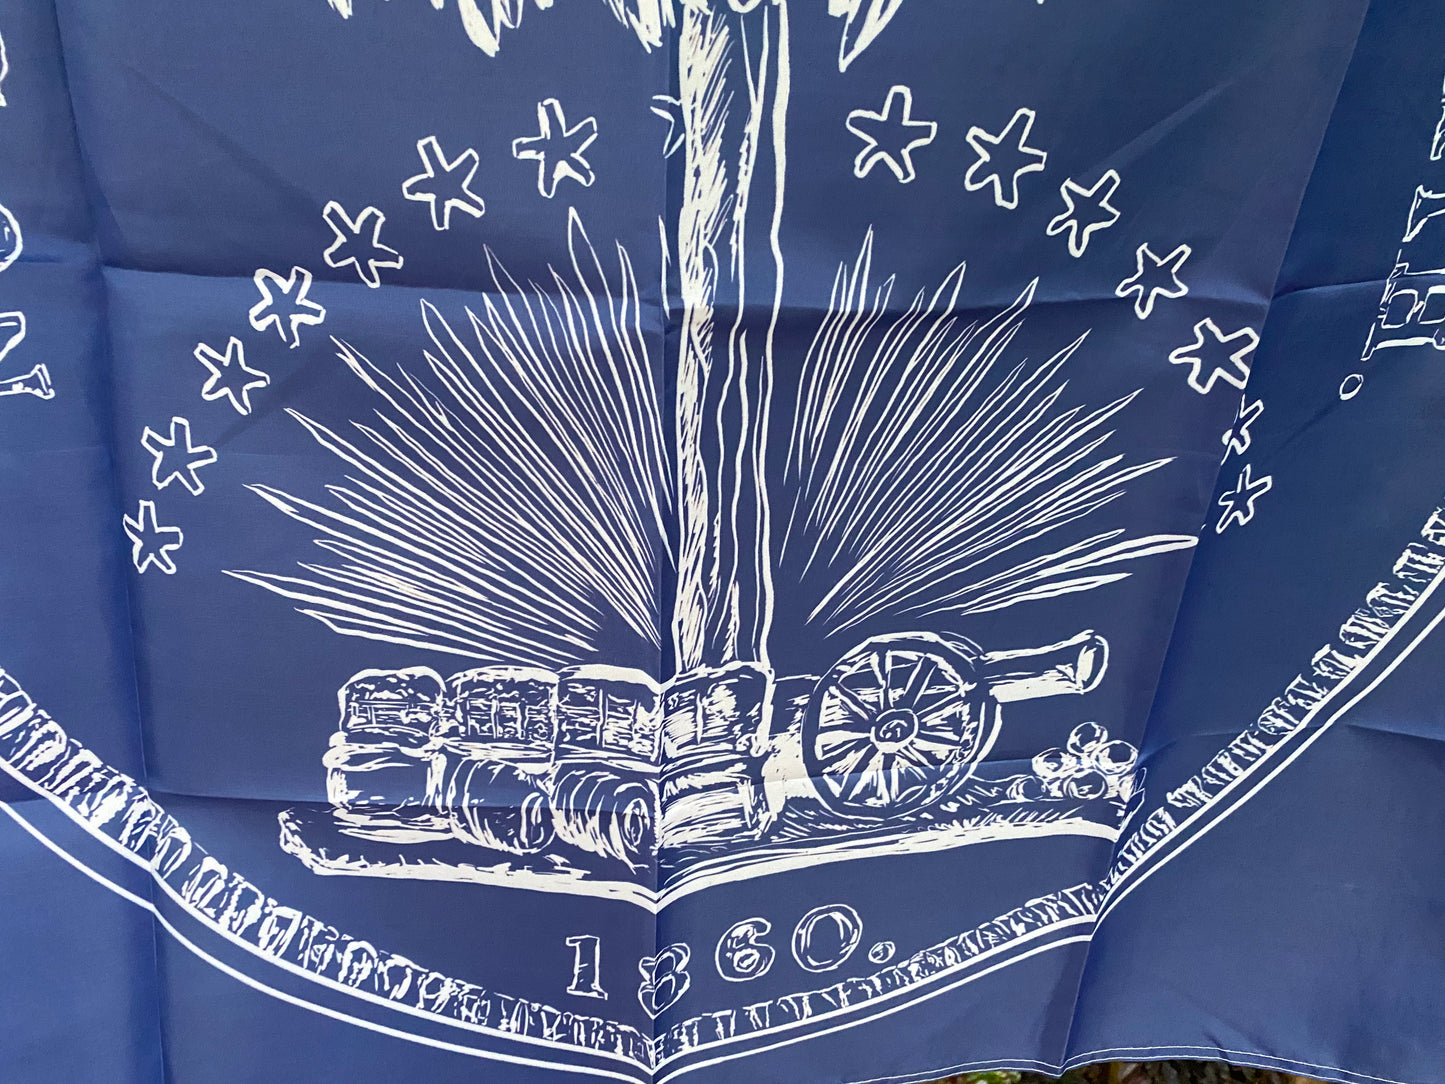 "No Submission to the North" House Flags